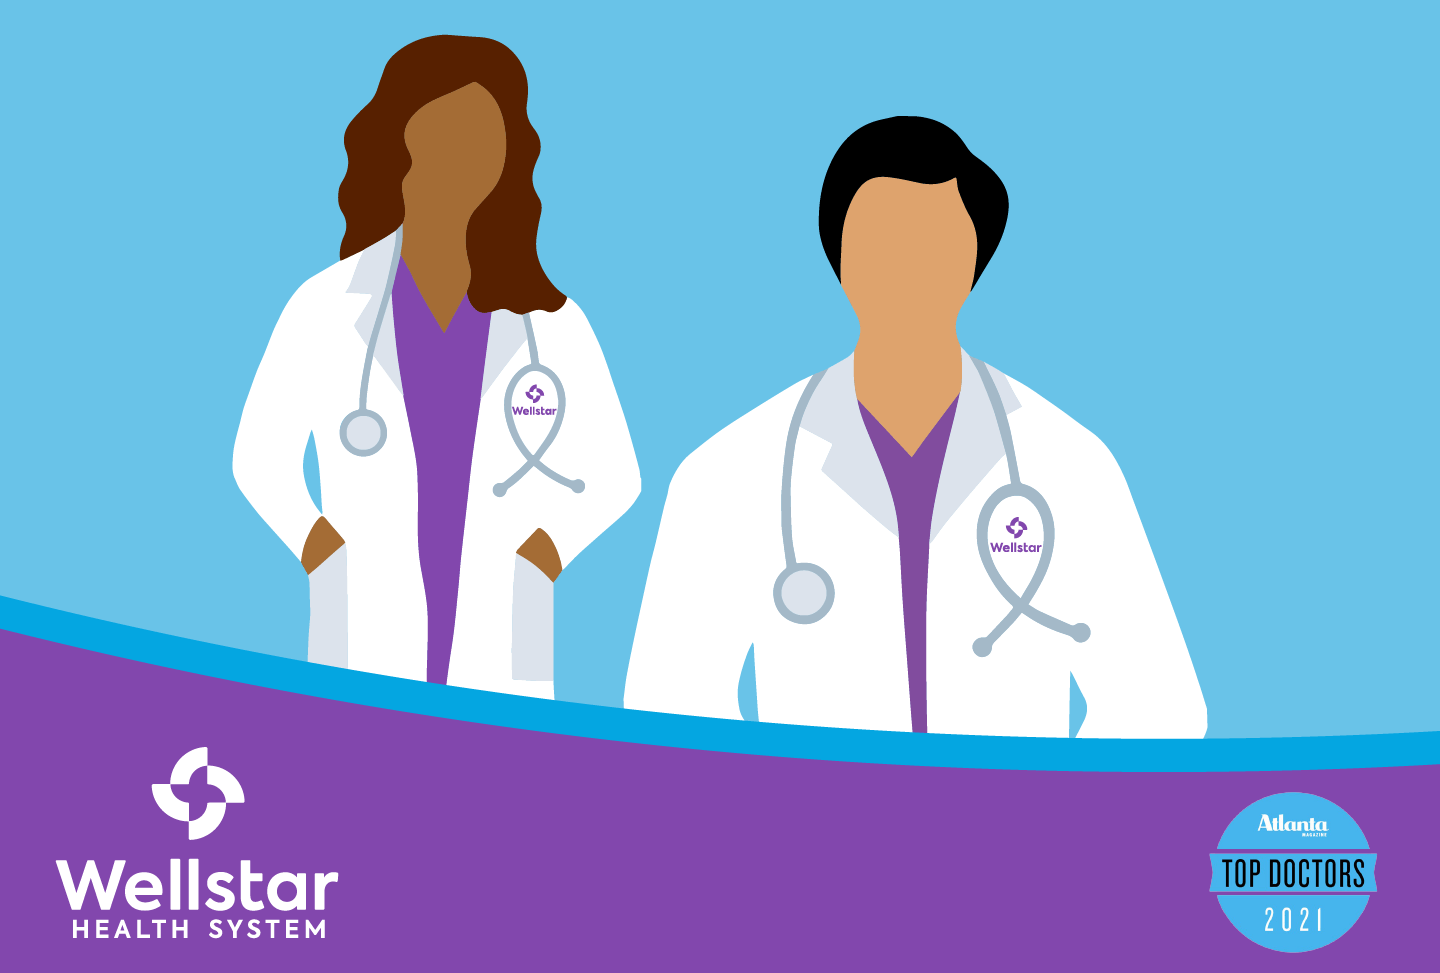 Illustration of two physicians with Wellstar and Top Doctors logos